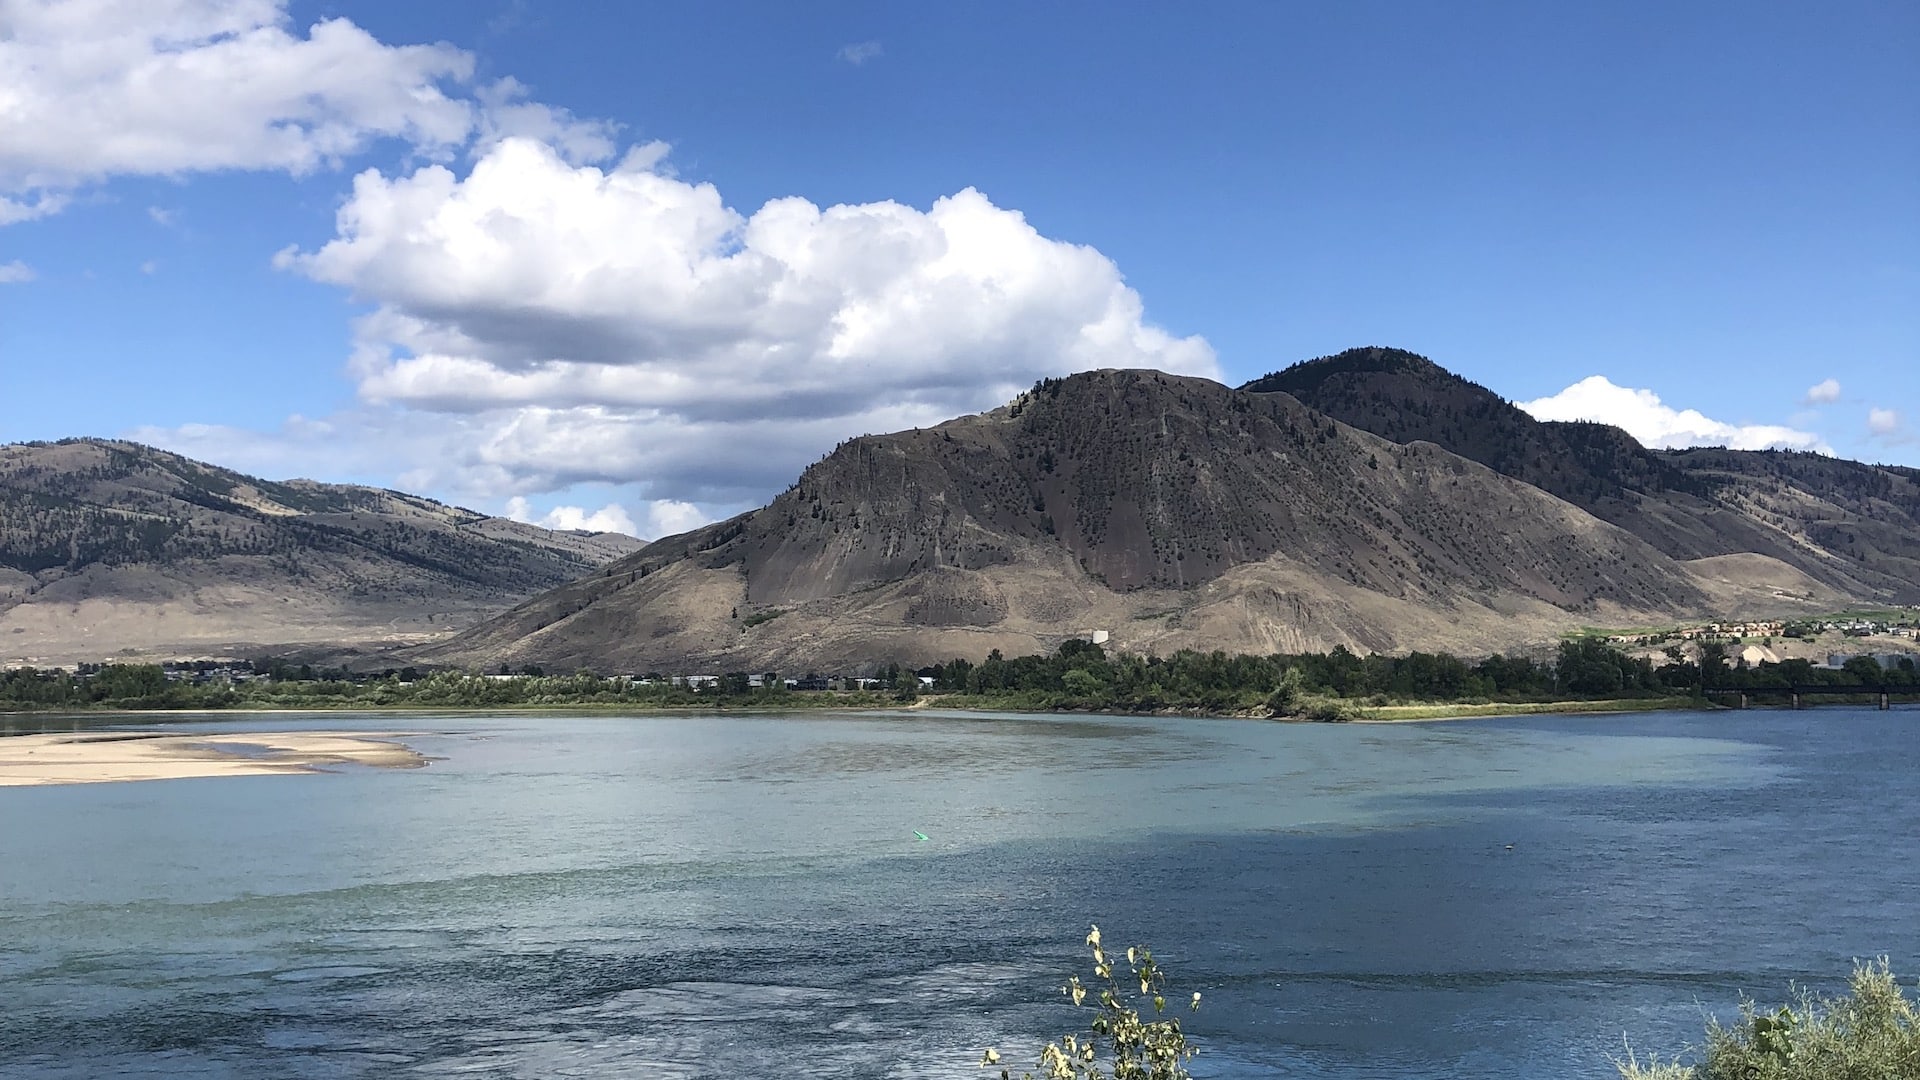 In Kamloops: Talking salmon, forestry and governance…